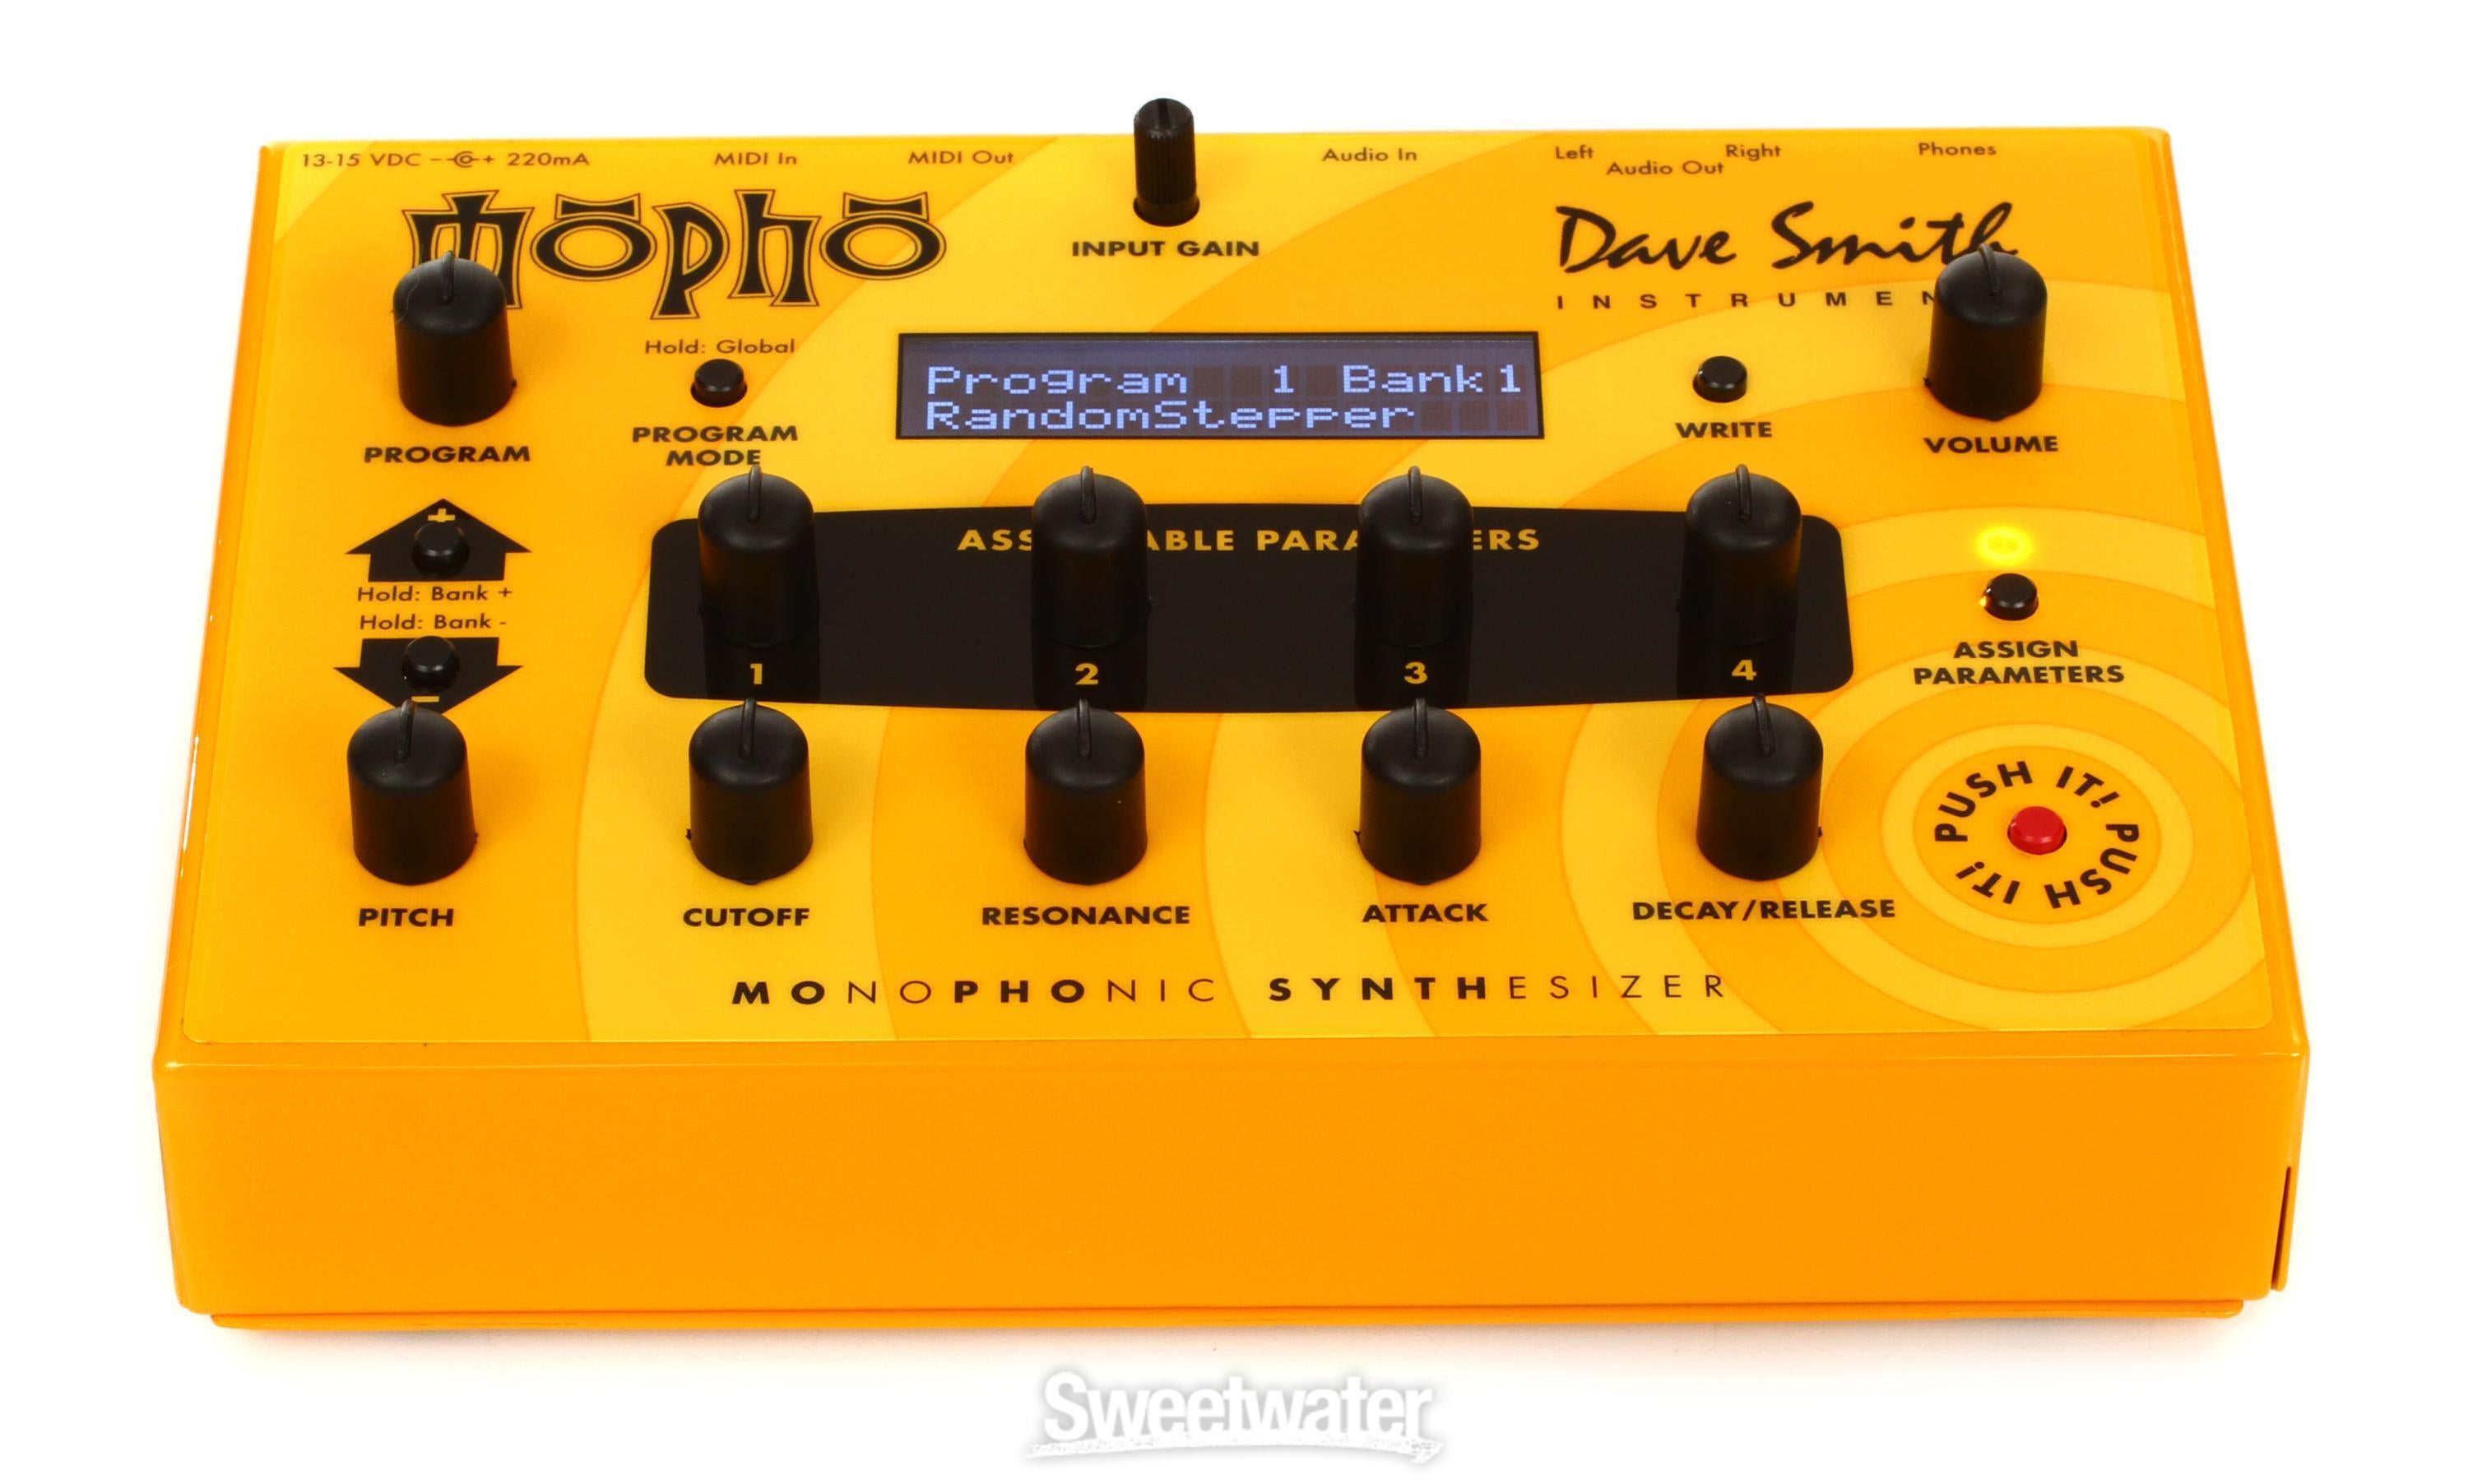 Dave Smith Instruments Mopho Analog Synthesizer Reviews | Sweetwater